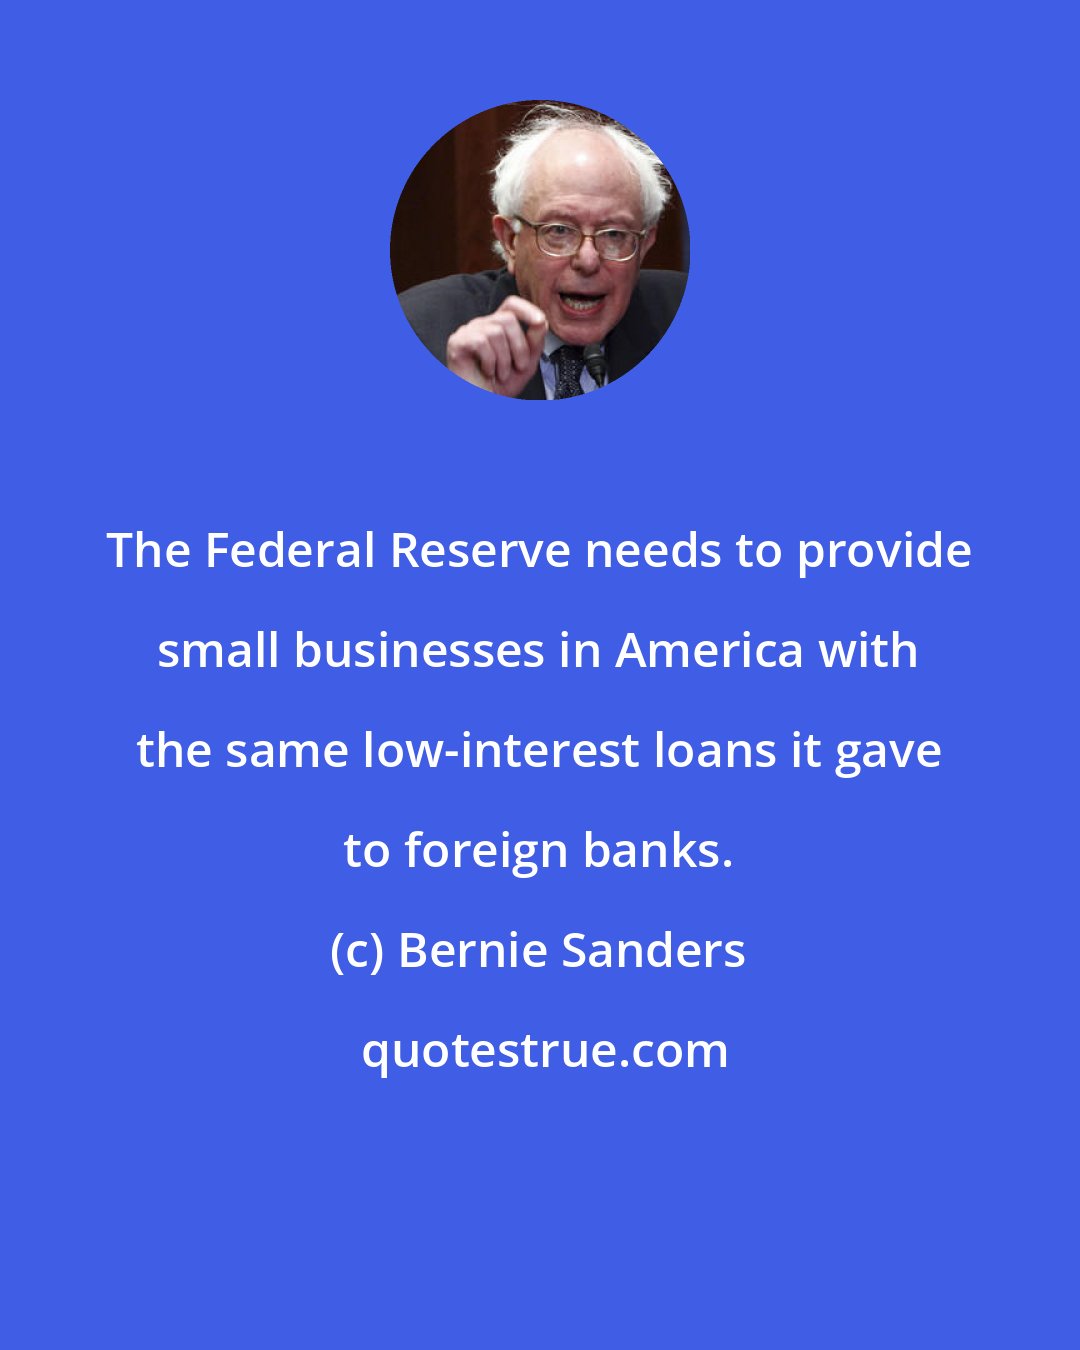 Bernie Sanders: The Federal Reserve needs to provide small businesses in America with the same low-interest loans it gave to foreign banks.